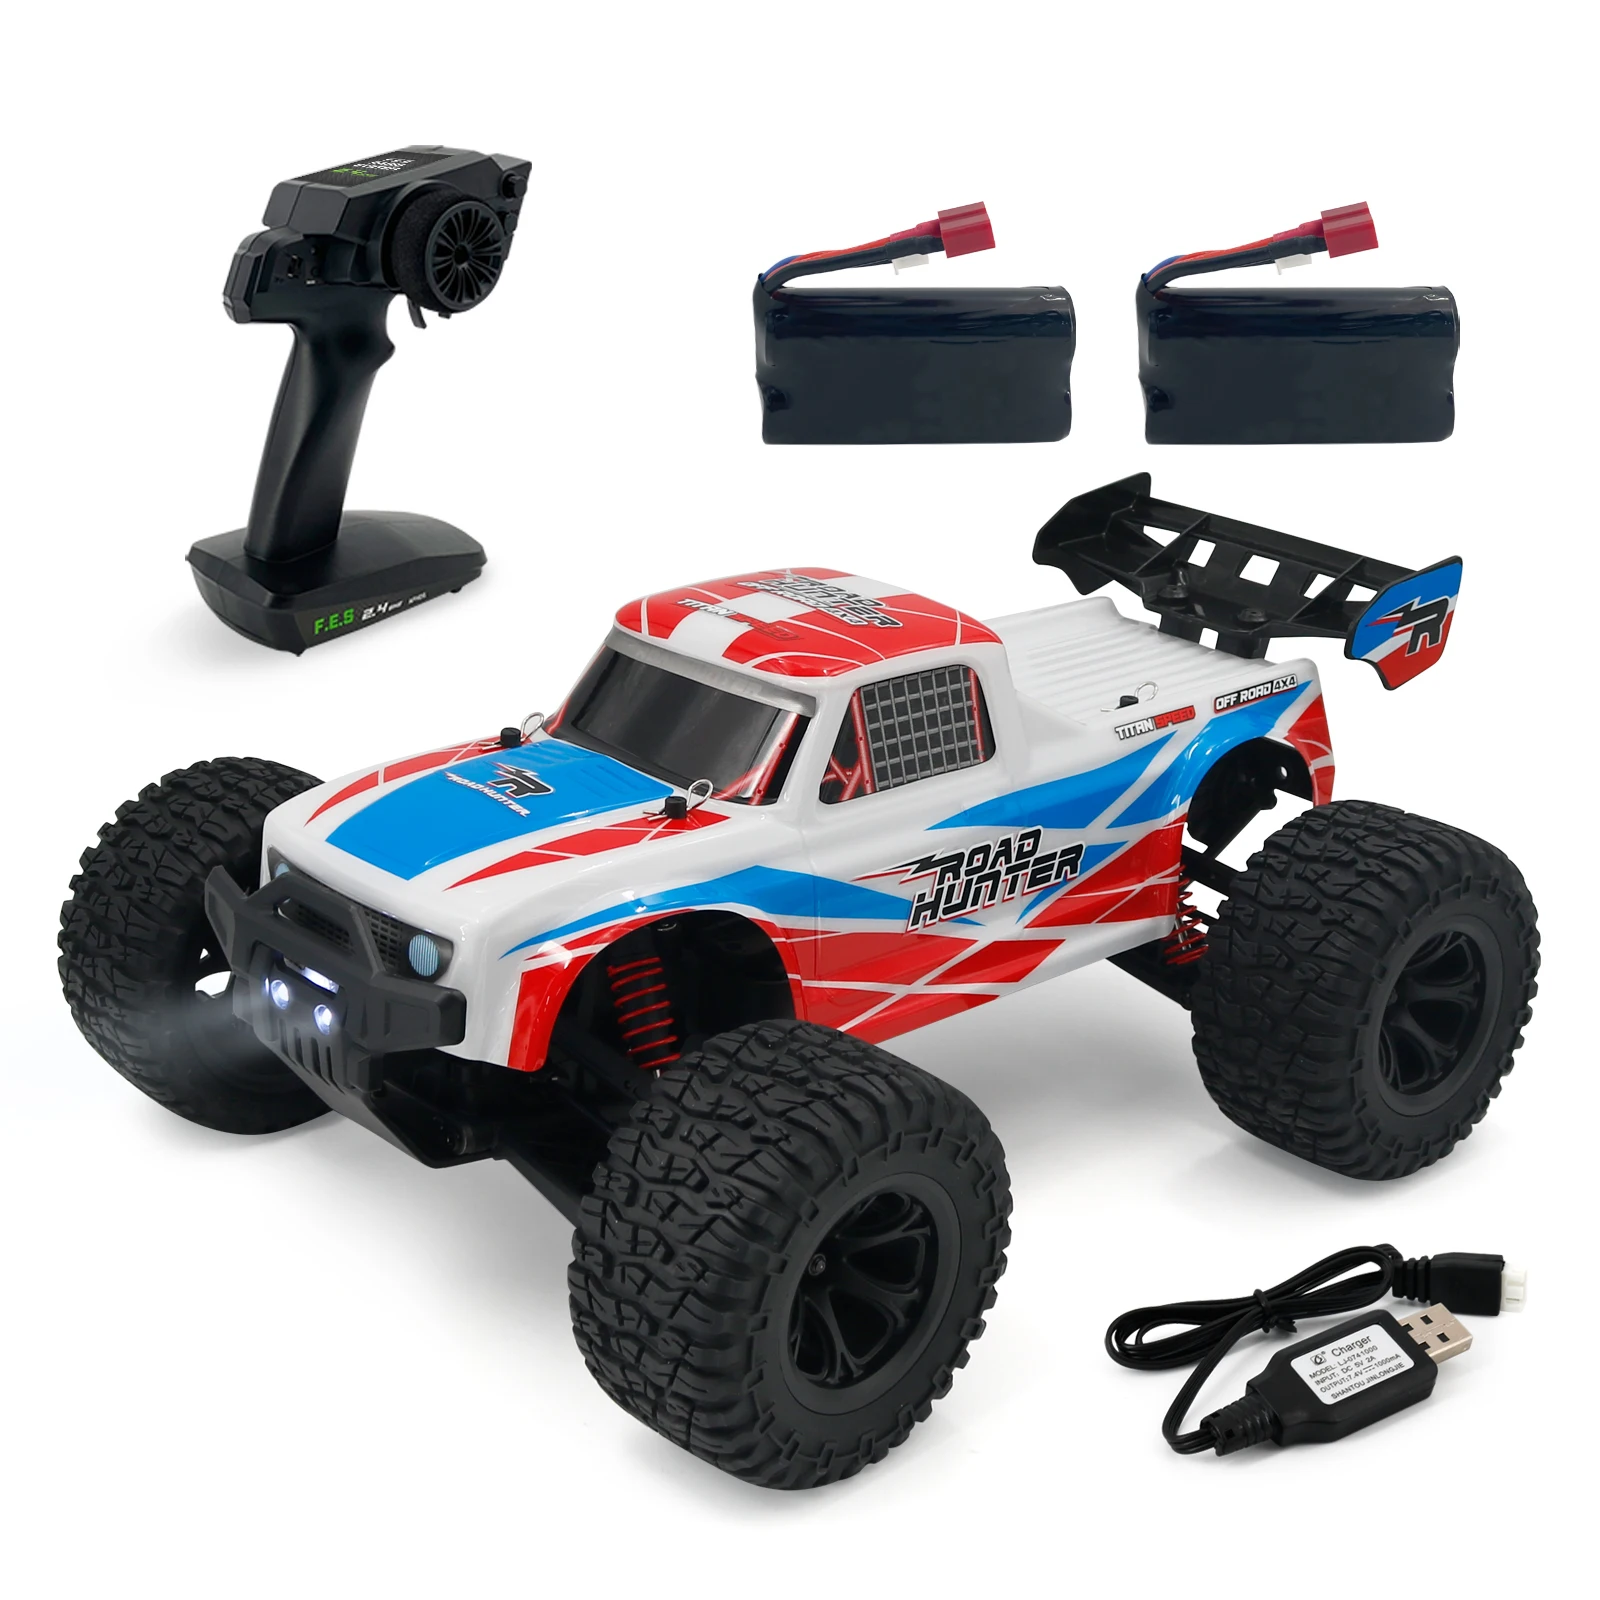 

ZROAD RC Car 1/12 Scale Remote Control 2.4G 4WD Off Road RC Pickup 40Km/h Racing Cars All Terrain RTR